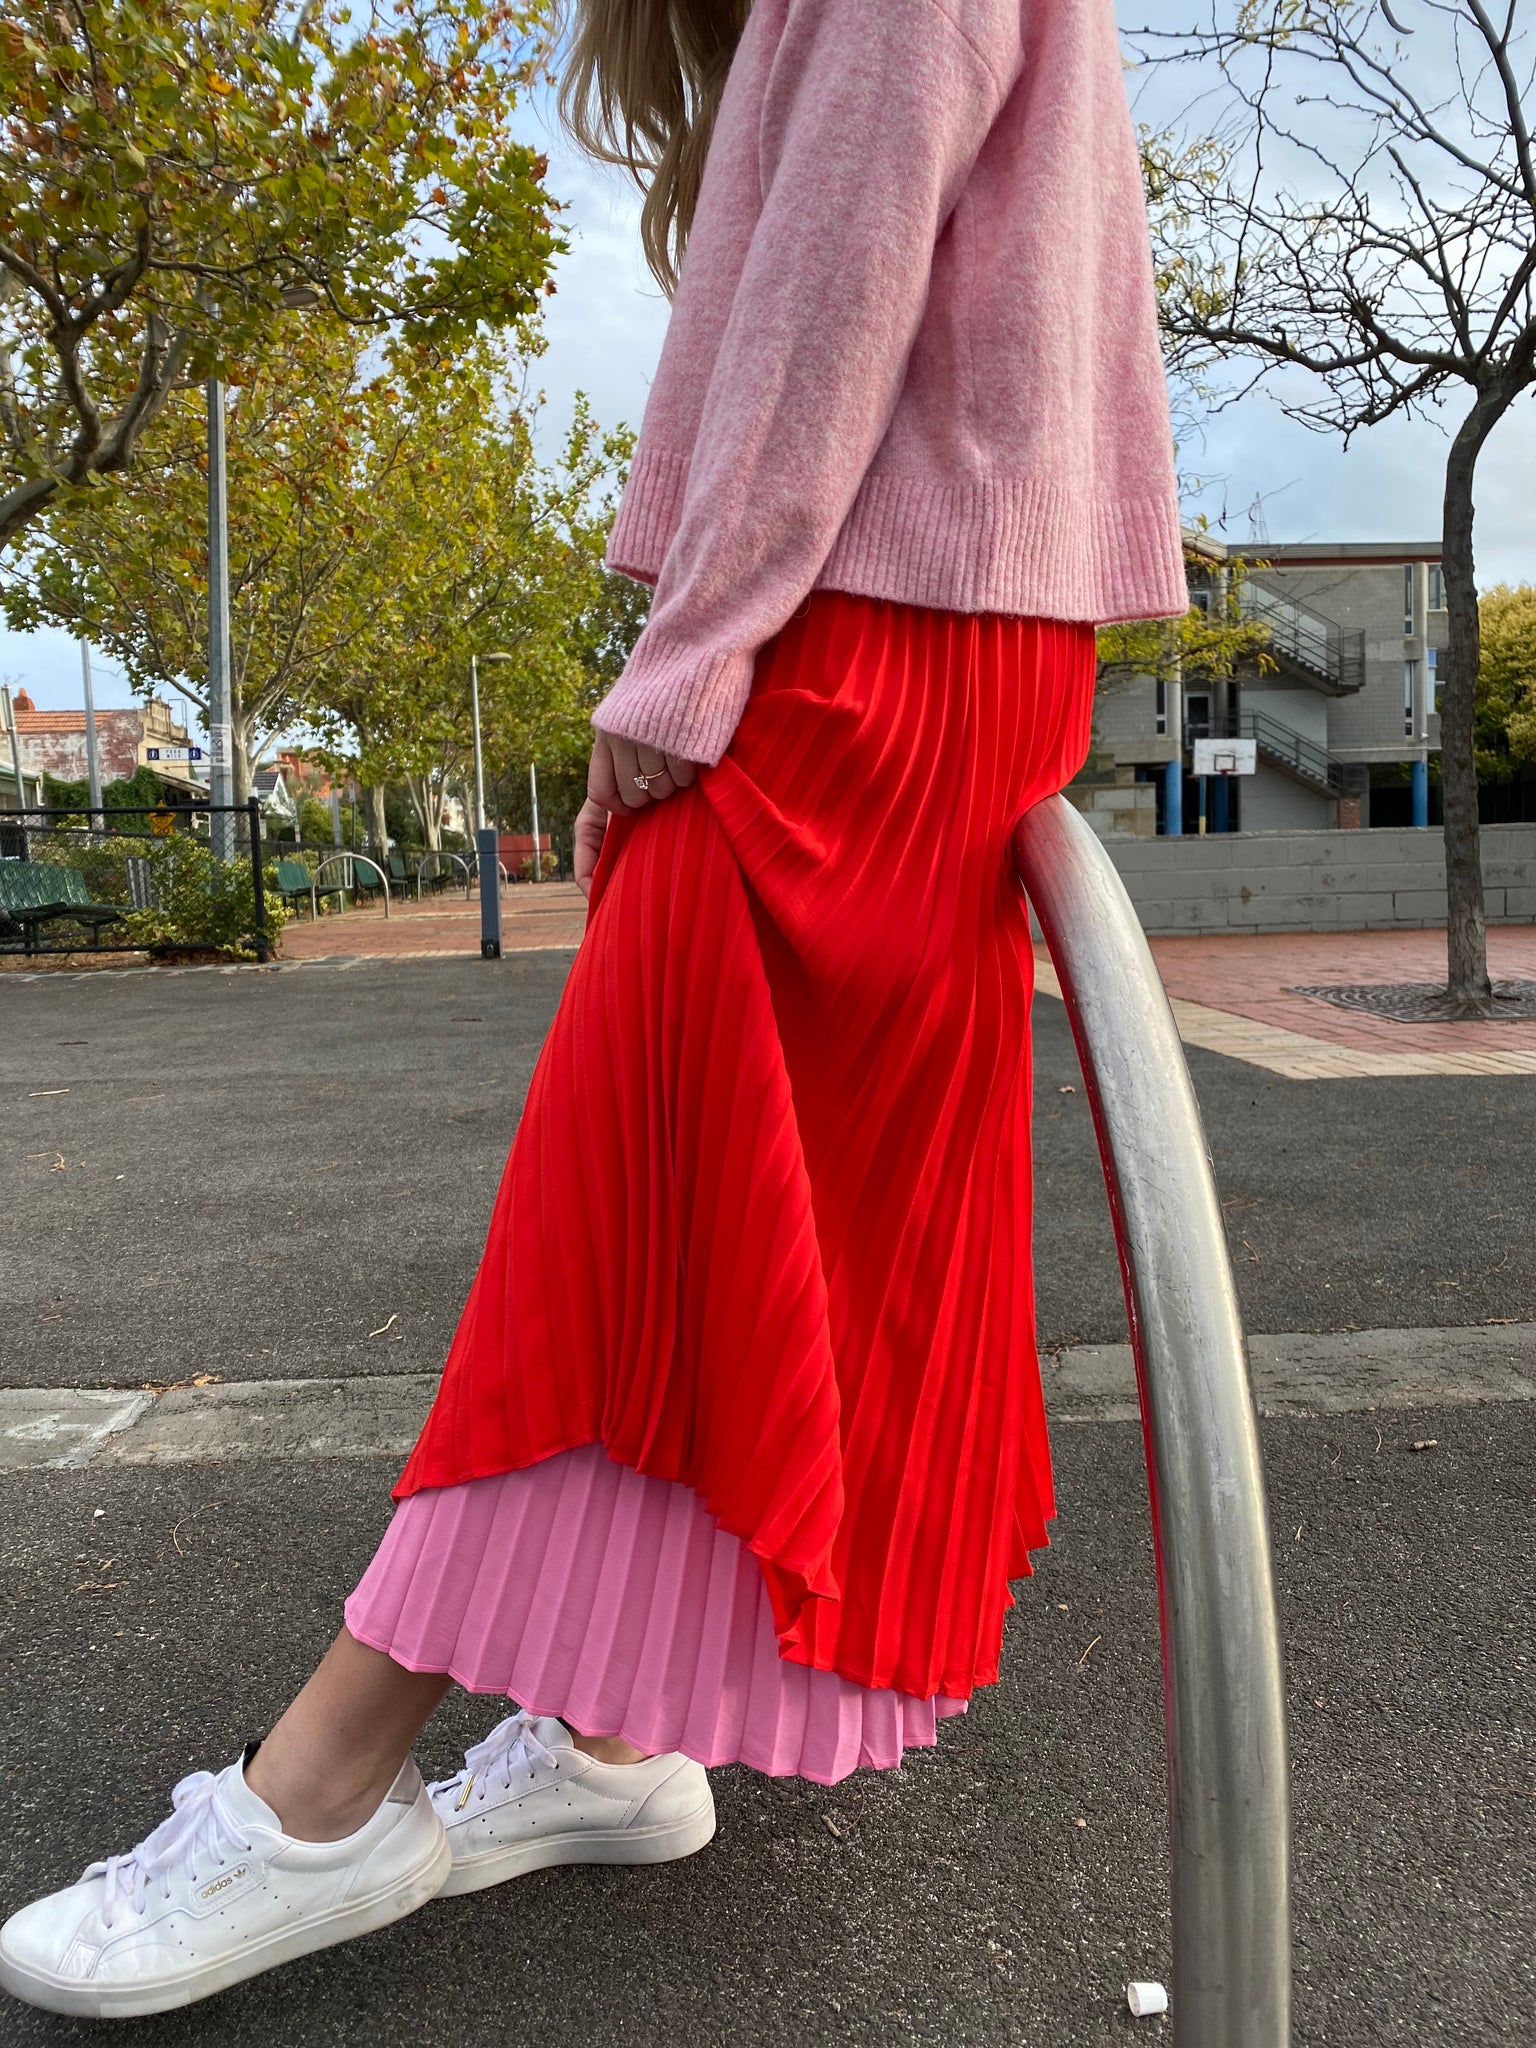 Pleated skirt  Pink skirt outfits, Pleated skirt outfit ideas